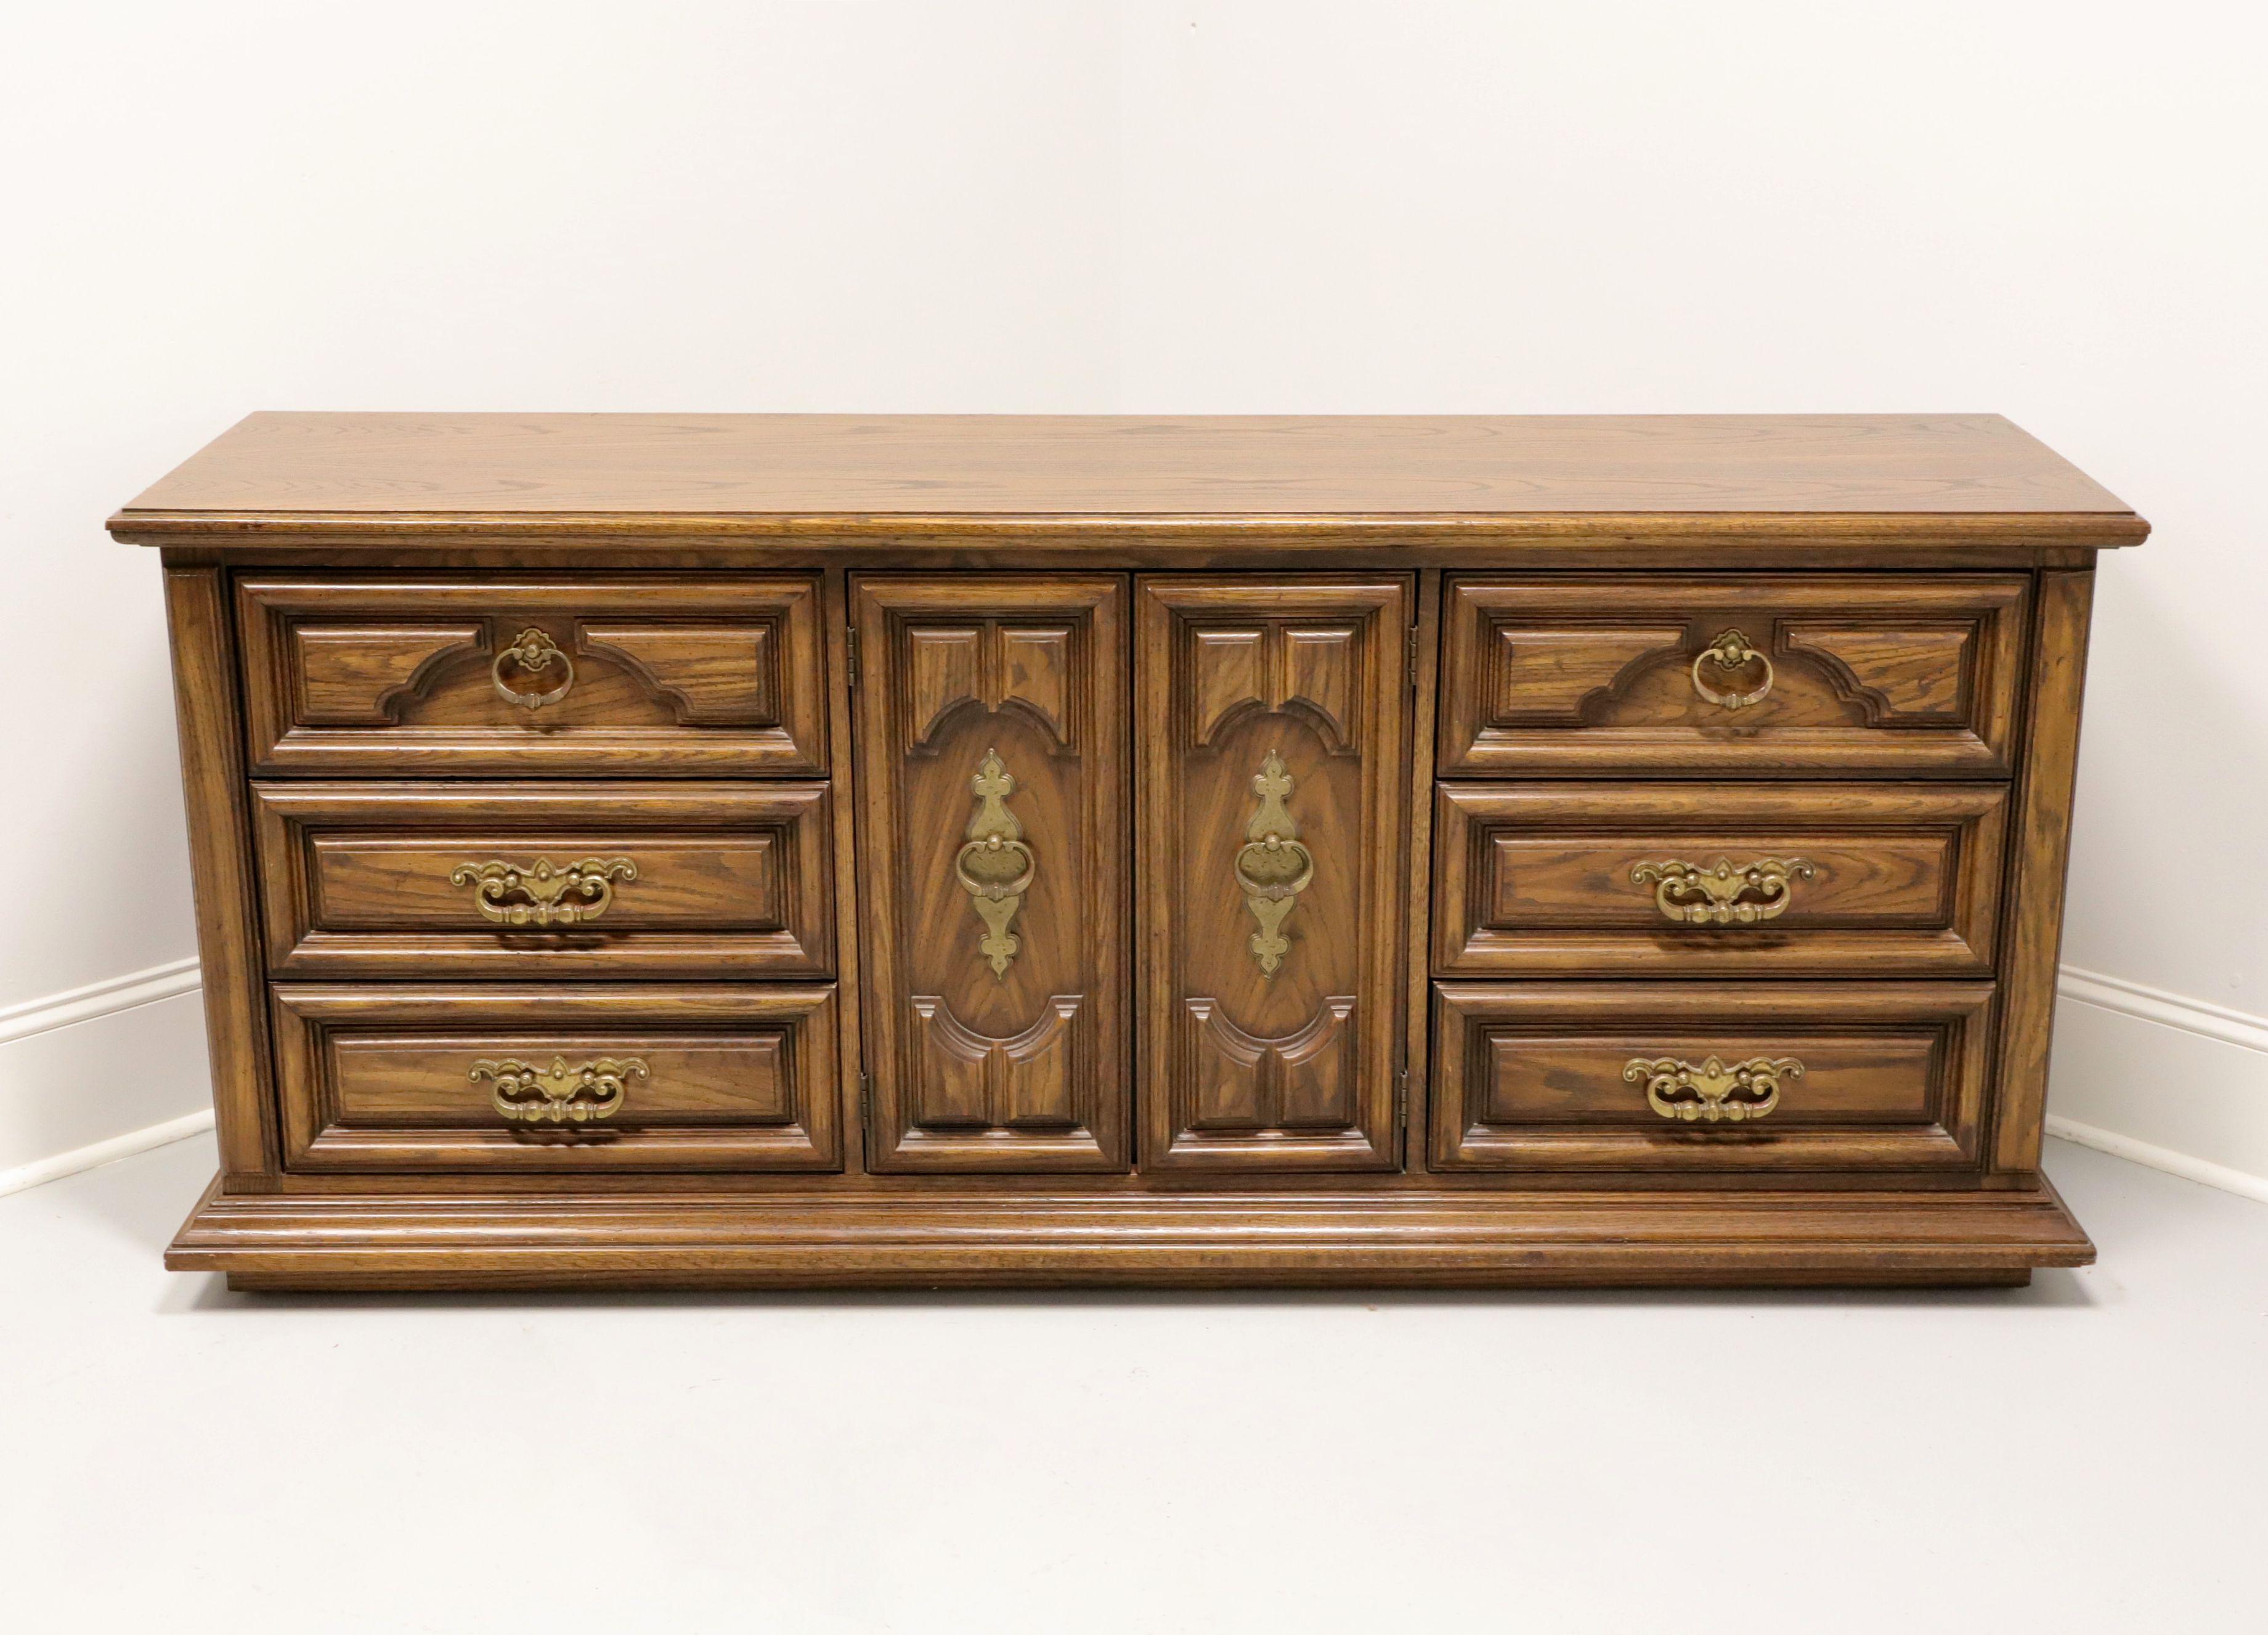 A Spanish Mediterranean style triple dresser by Thomasville, from their Segovia Collection. Solid oak with slightly distressed finish, bevel edge top, brass hardware, raised door & drawer fronts, and a solid base. Features nine drawers of dovetail